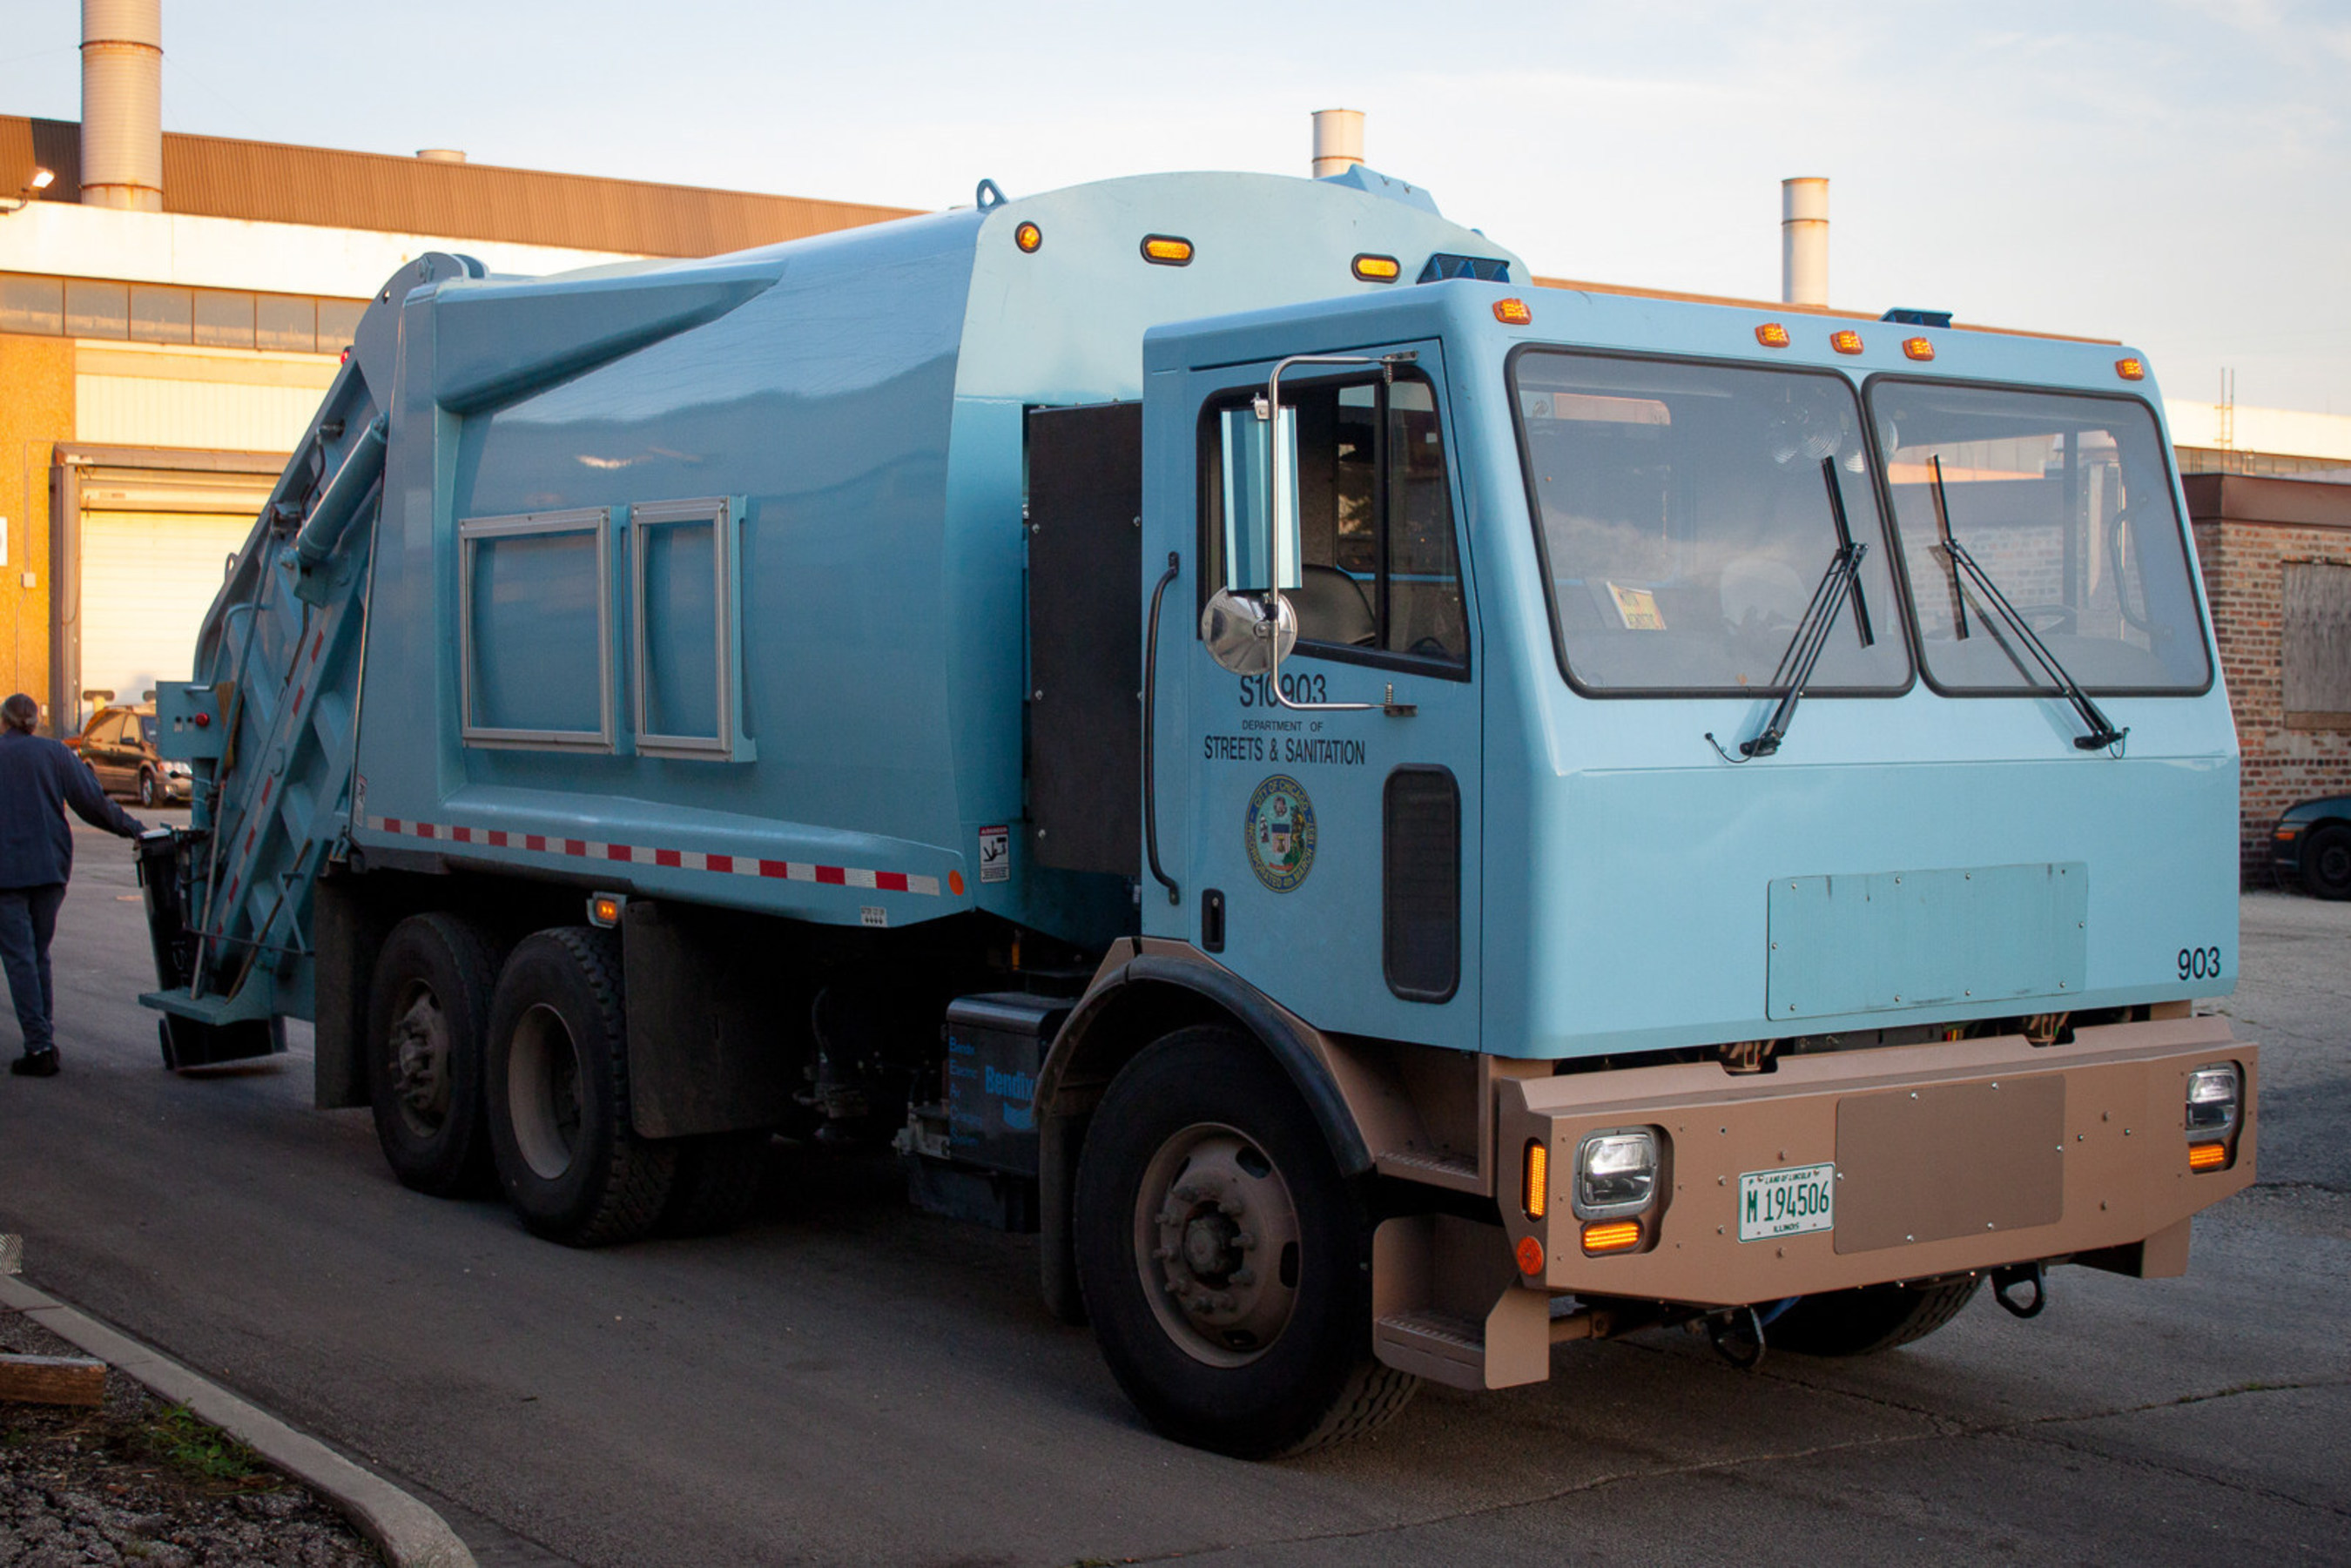 The City of Chicago is currently running the Motiv ERV on different residential refuse and recycling routes of up to 60 miles, saving 2,688 gallons a year. (PRNewsFoto/Motiv Power Systems)